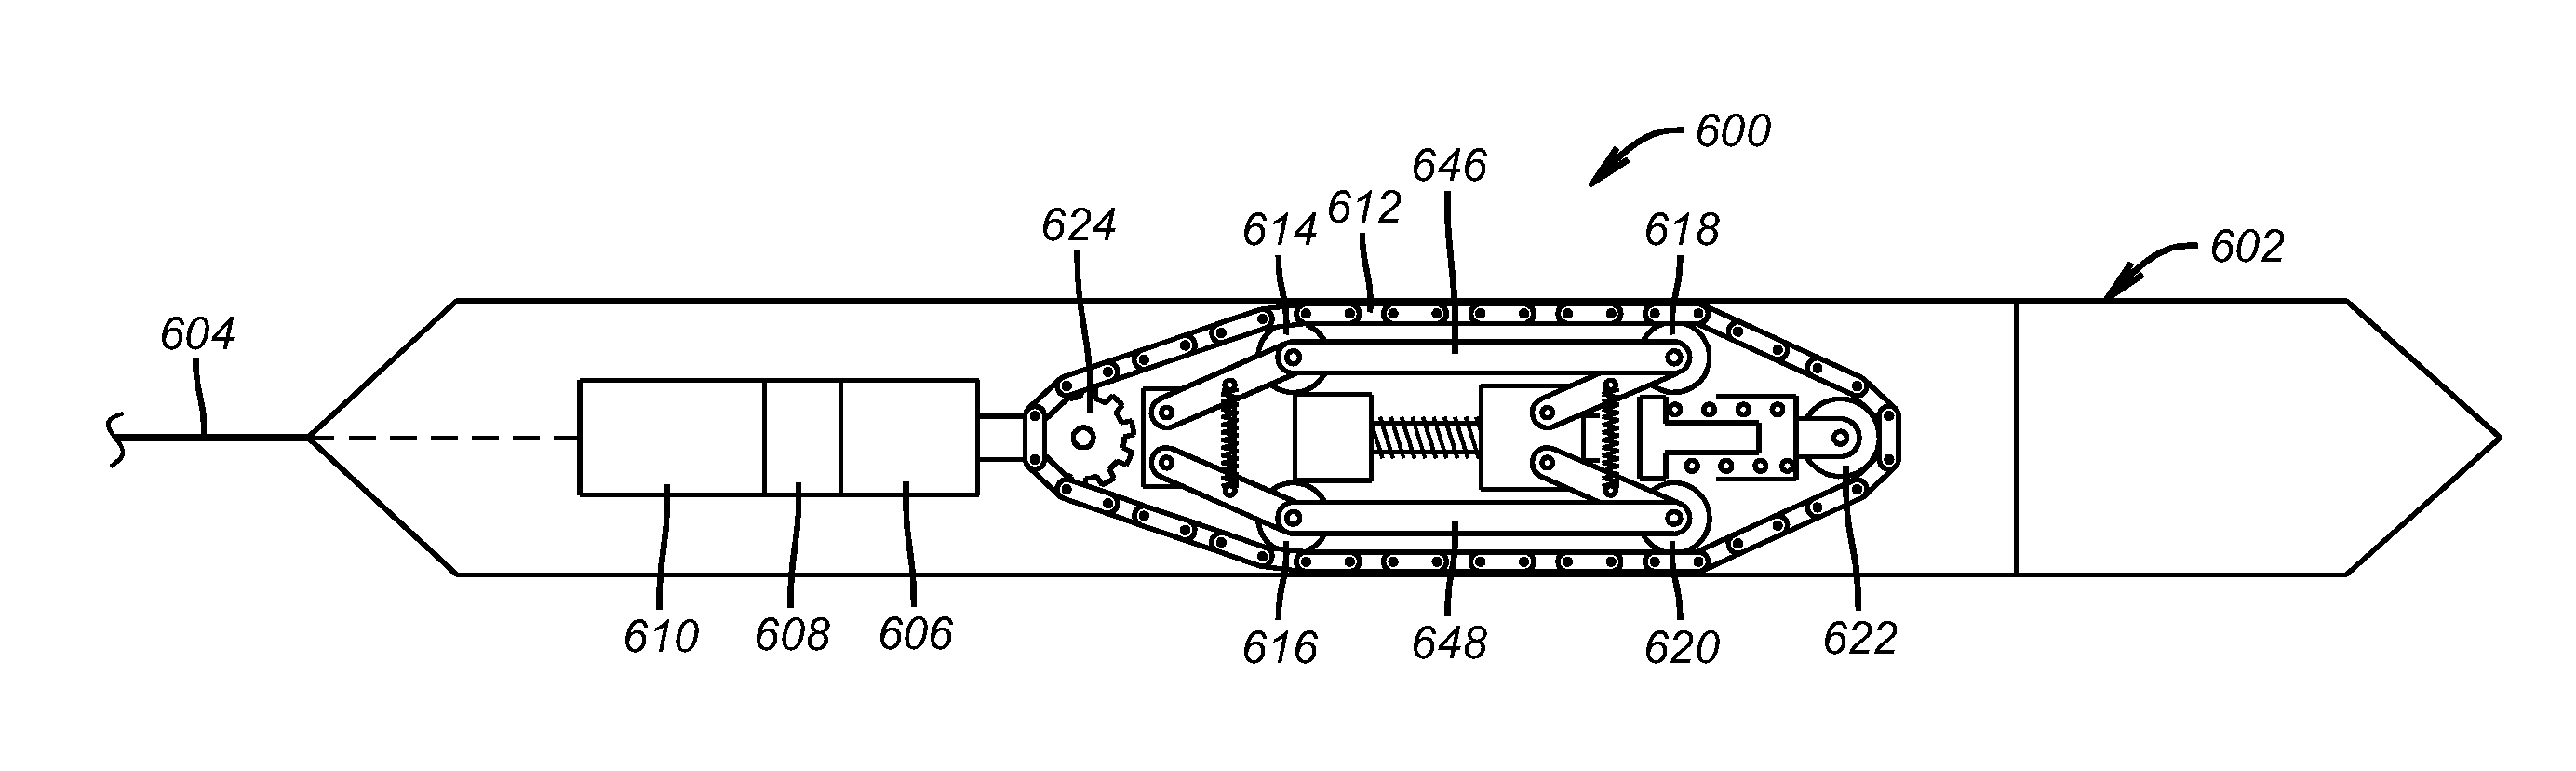 Slickline Conveyed Bottom Hole Assembly with Tractor